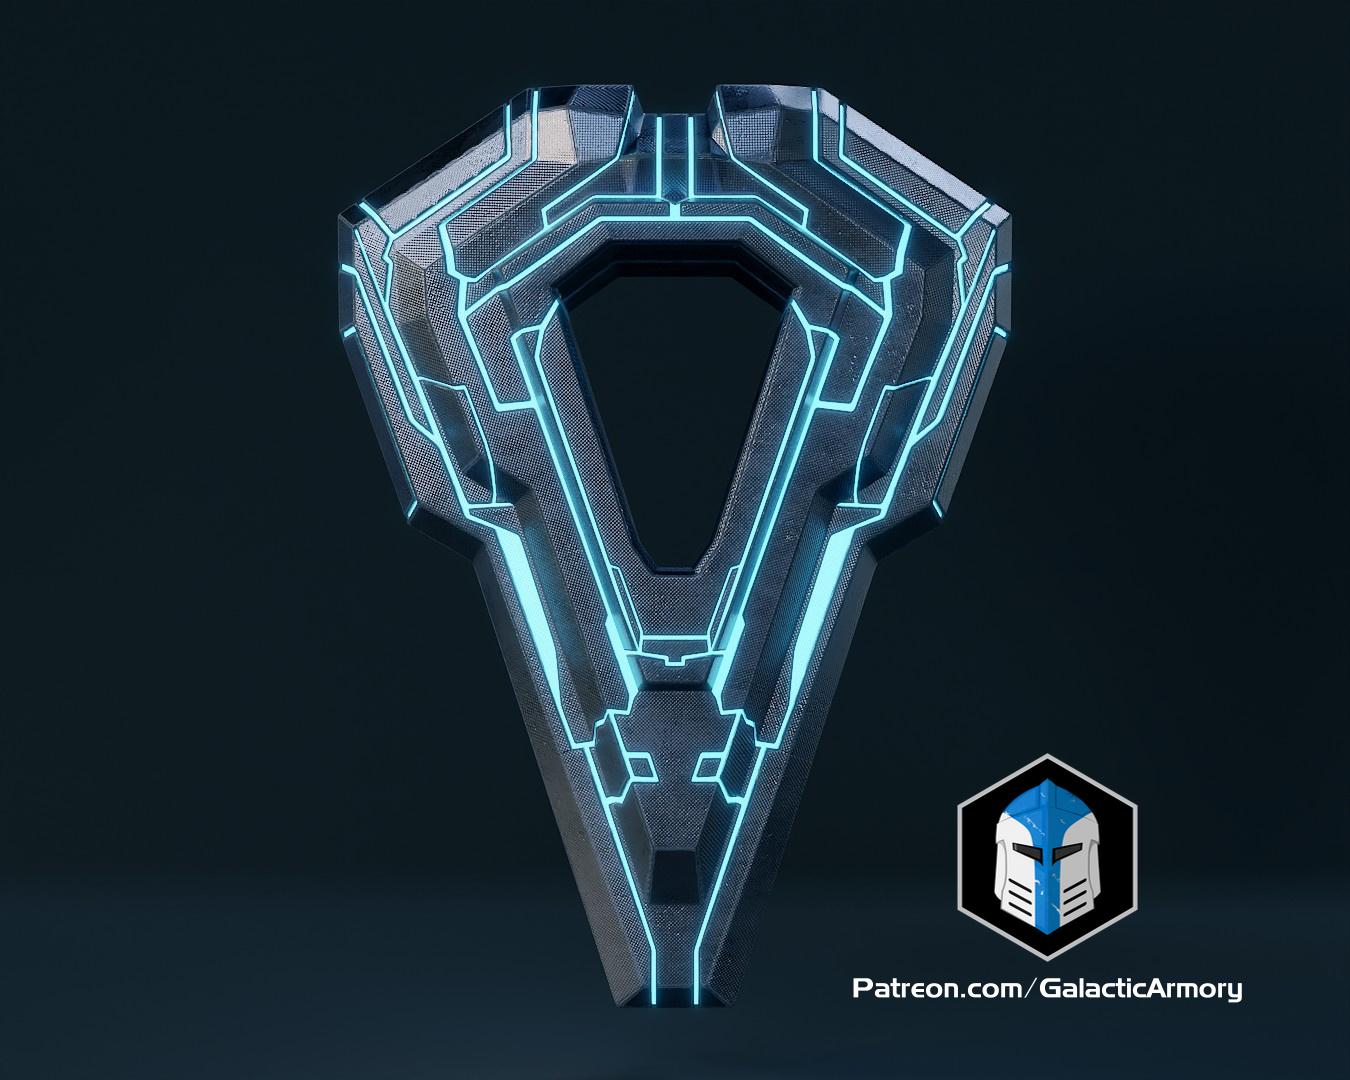 The floating Halo Keystone Artifact has been added to the February rewards!